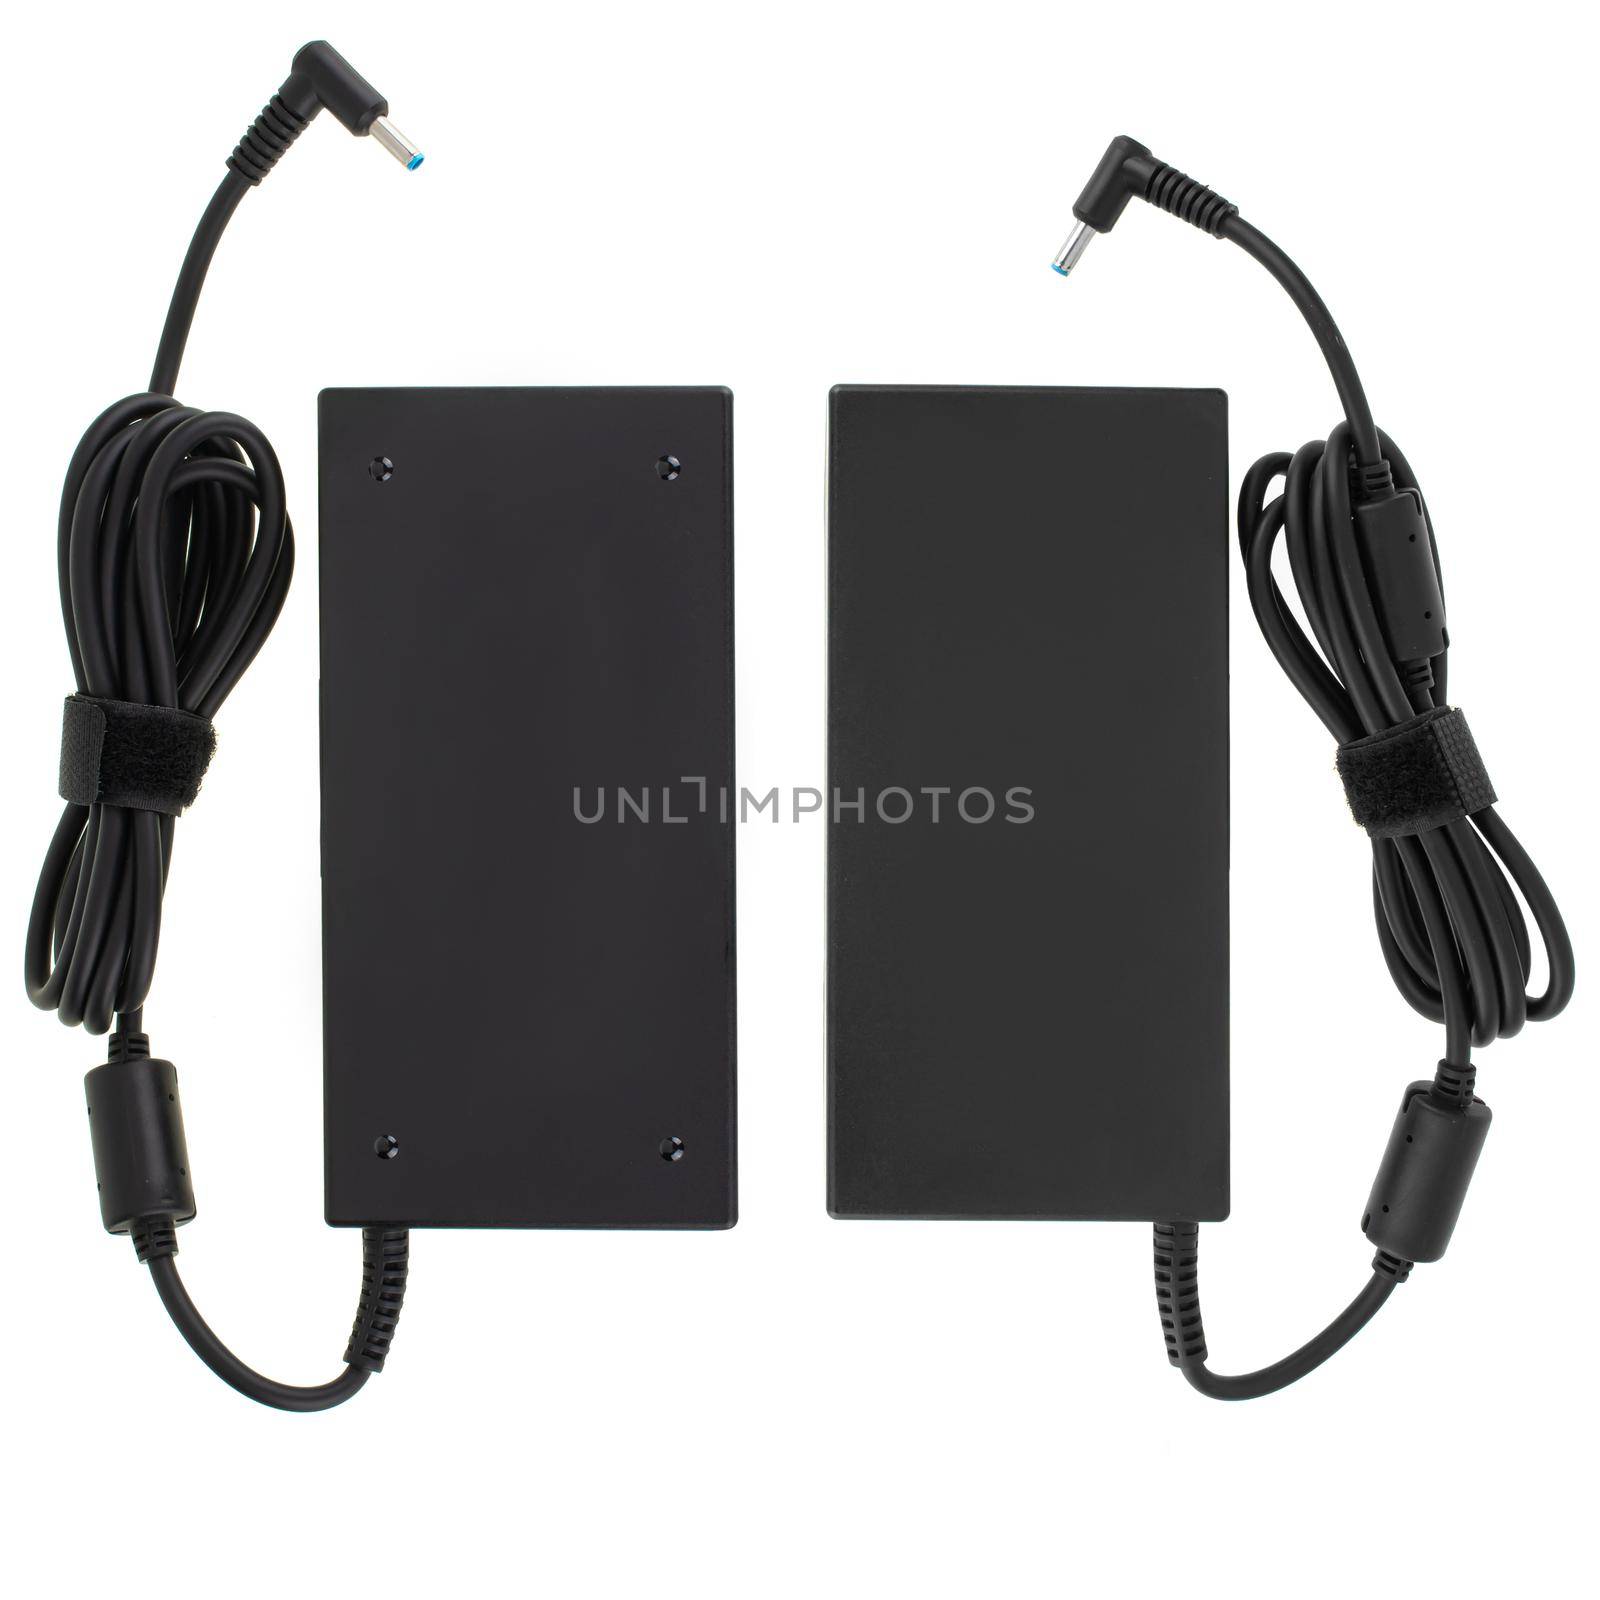 power adapter for a laptop, an accessory for a laptop, a spare for a computer, on a white background